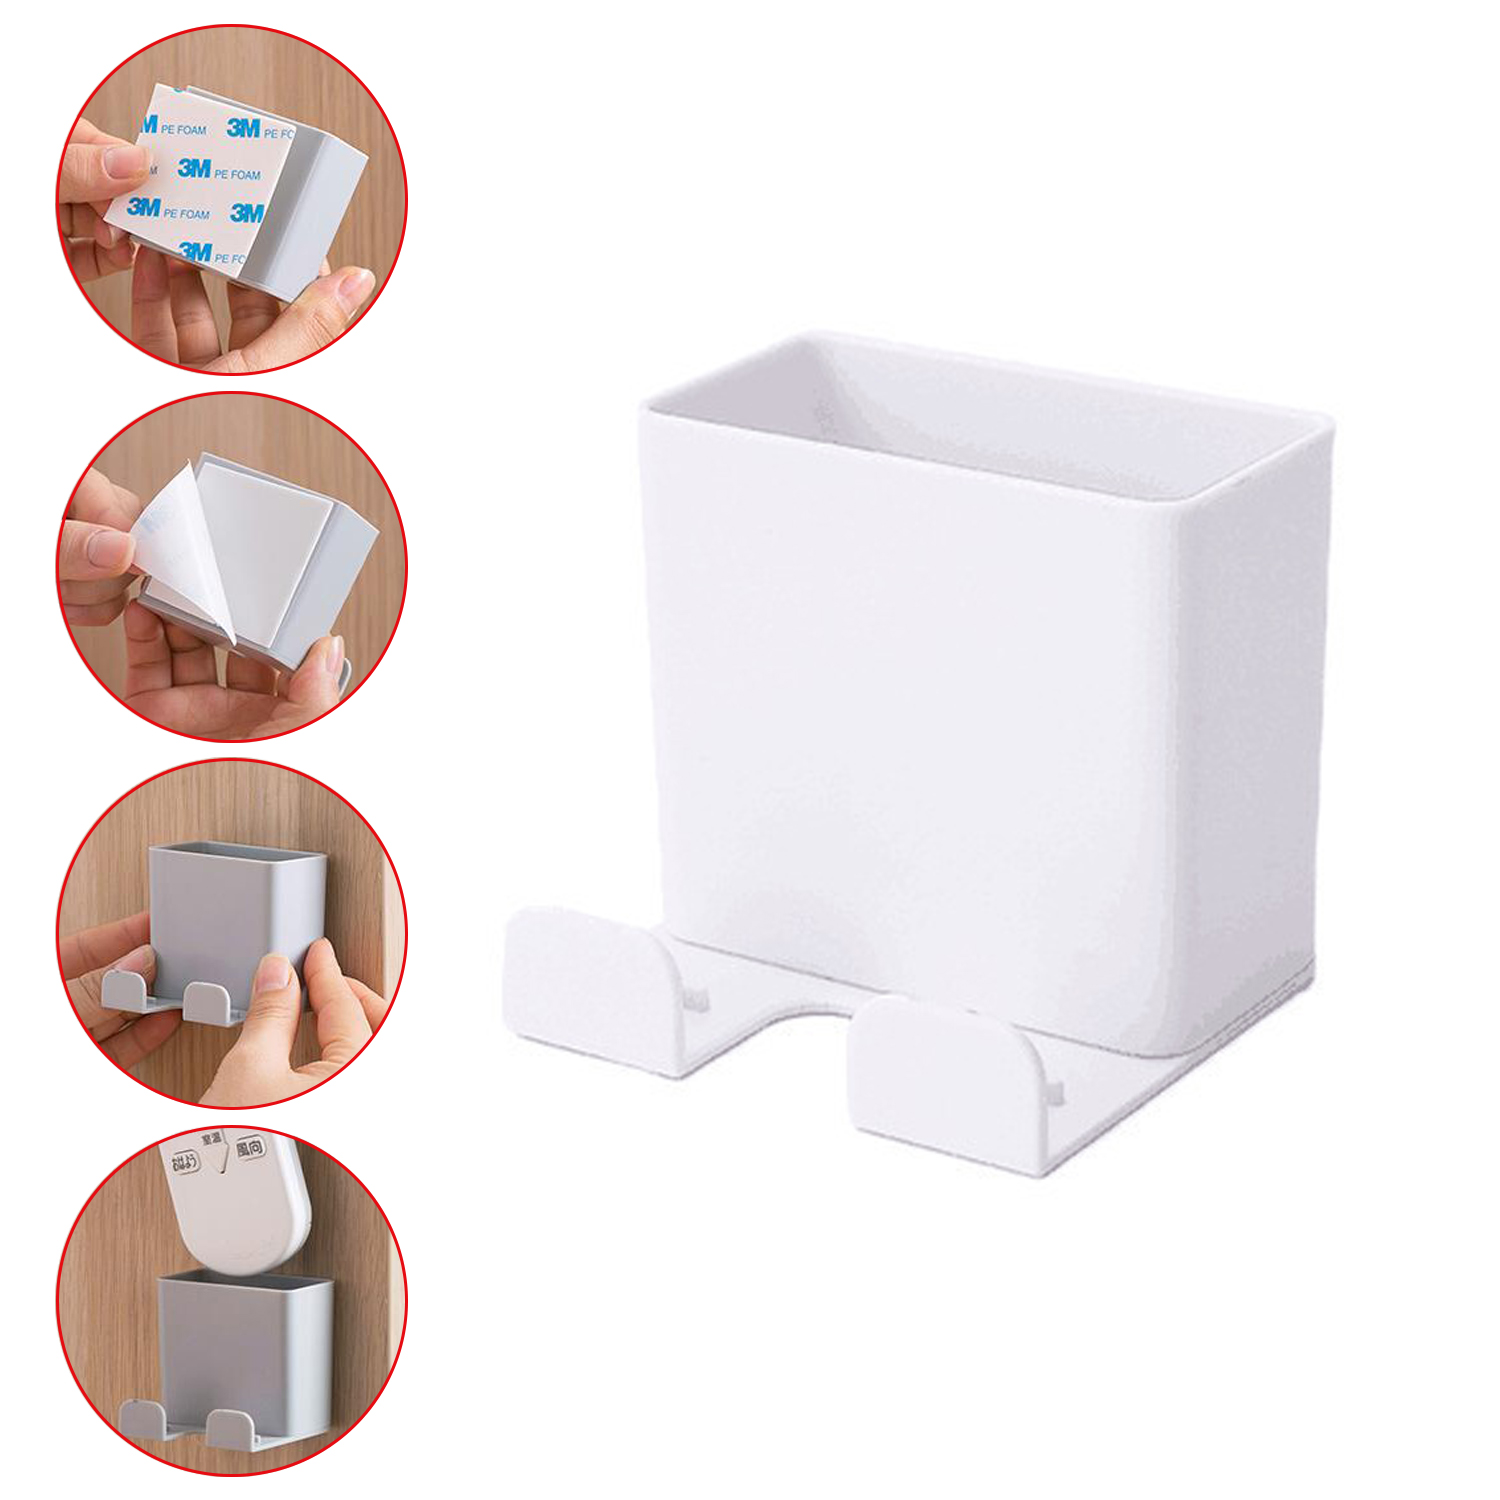 1Pcs Wall Mounted Organizer Storage Box Remote Control Air Conditioner Storage Case Mobile Phone Plug Holder Stand Container